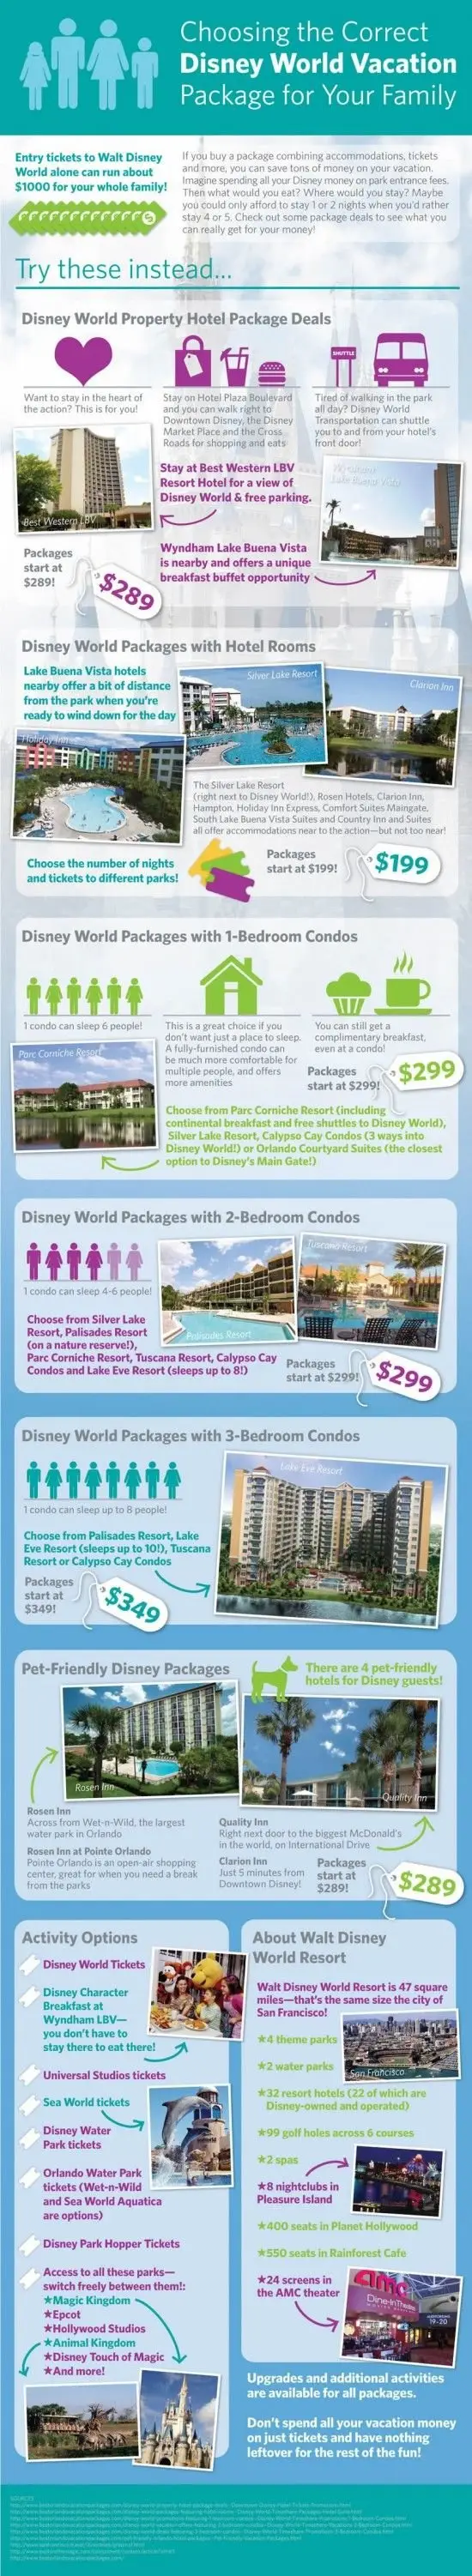 CHOOSING the CORRECT DISNEY WORLD VACATION PACKAGE for YOUR FAMILY